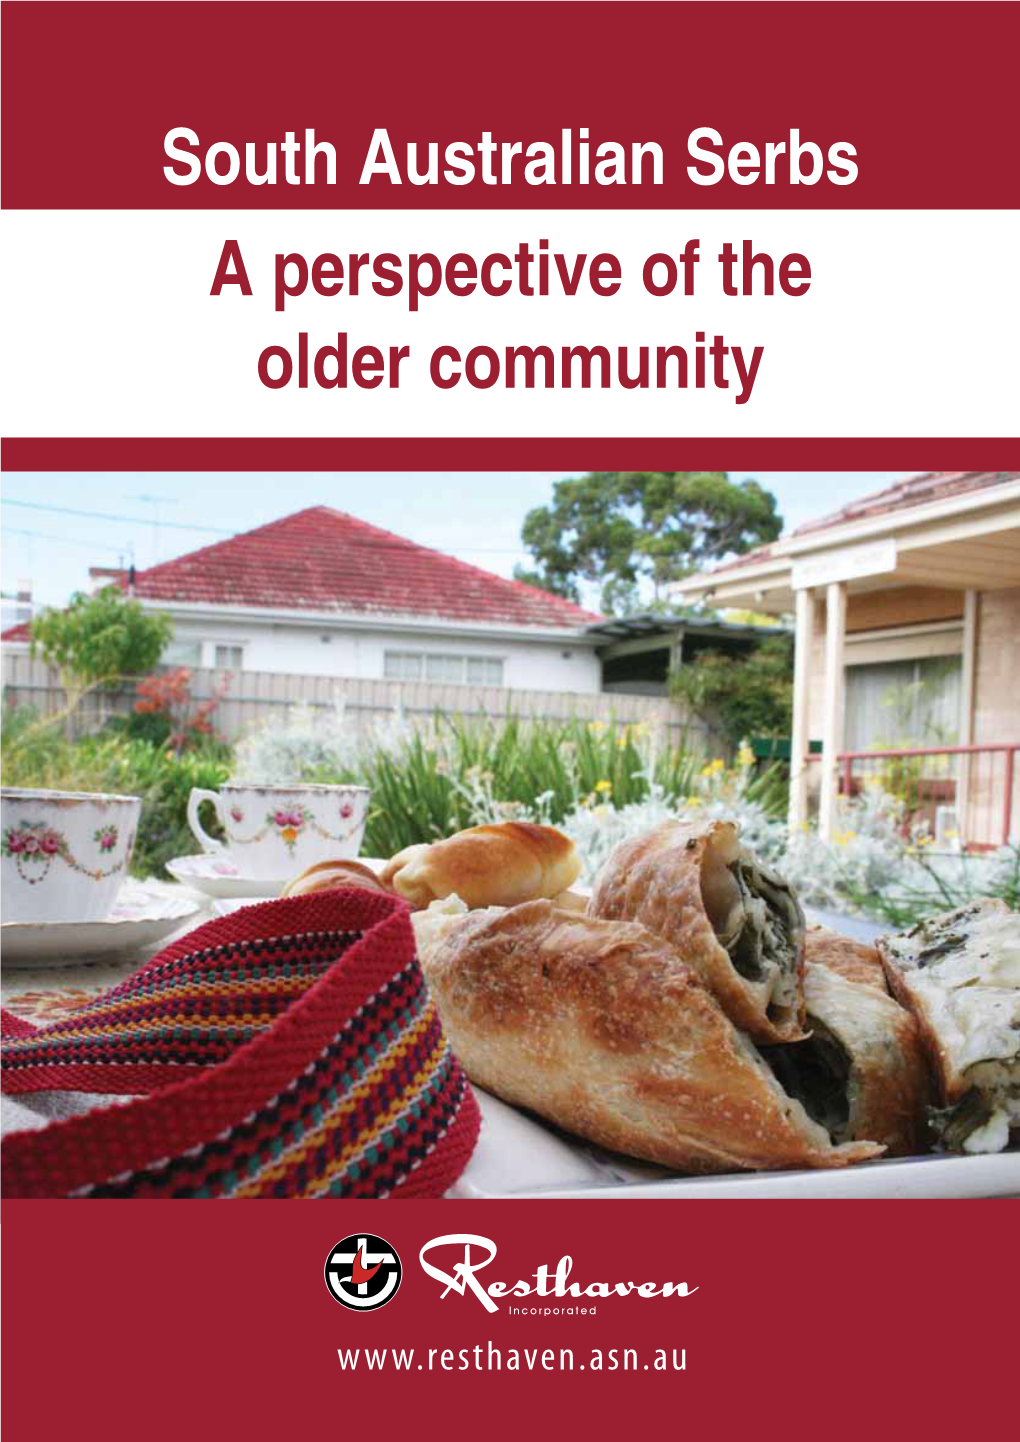 South Australian Serbs a Perspective of the Older Community